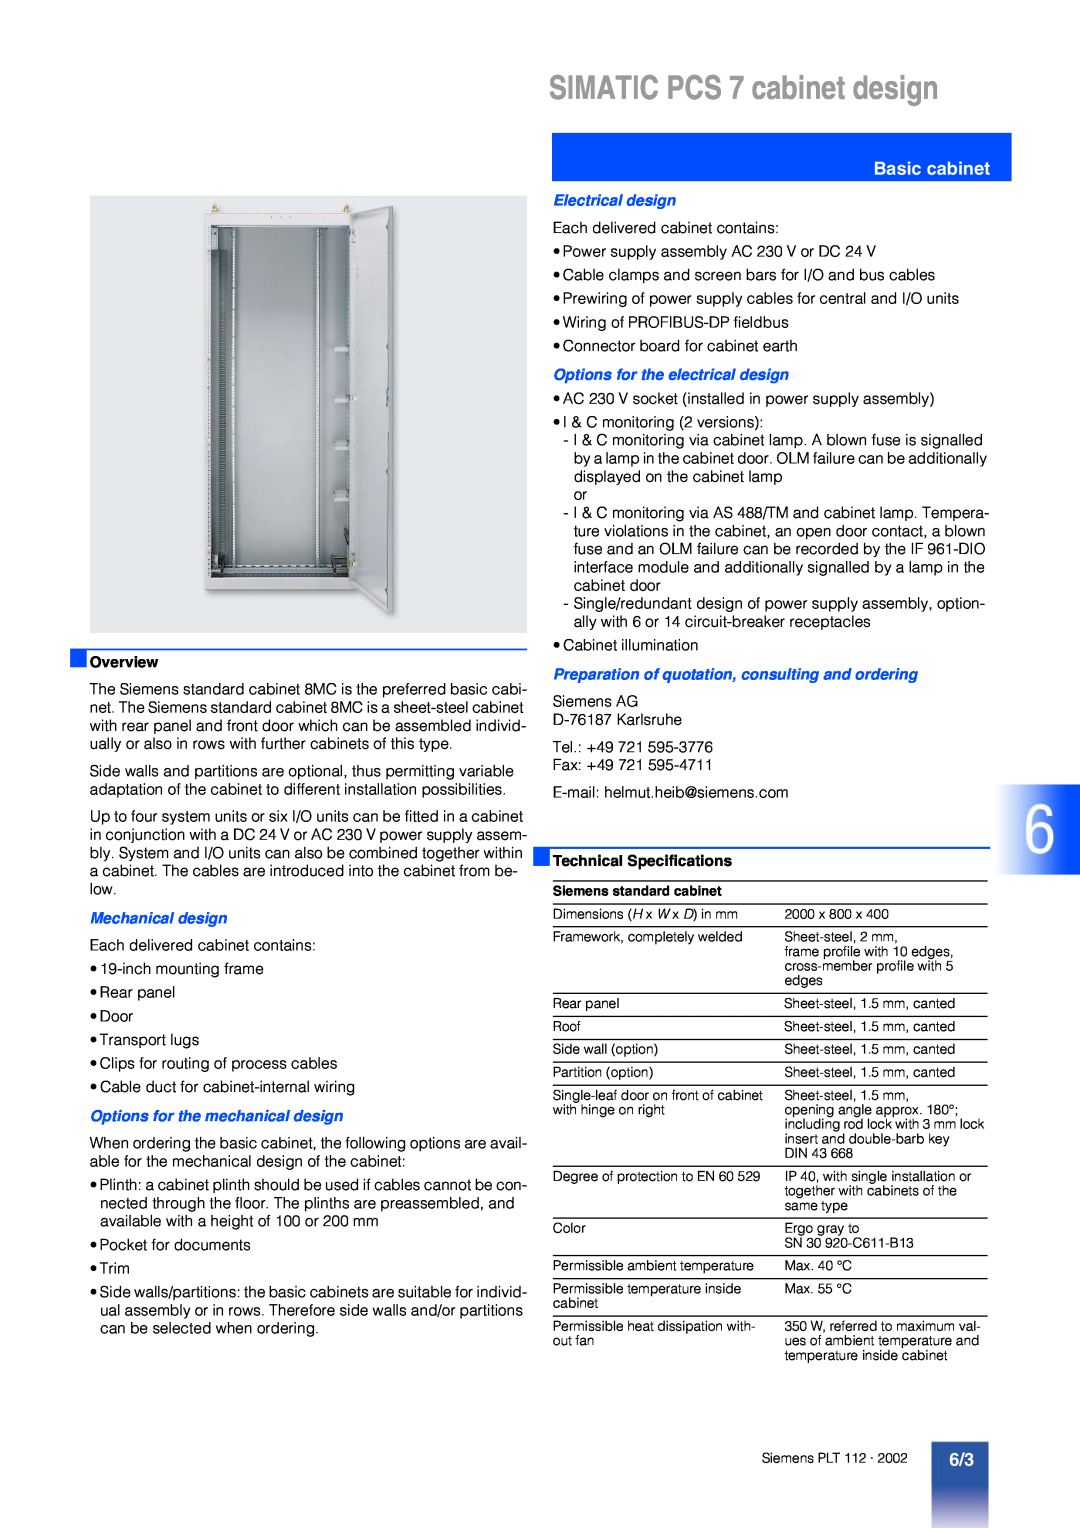 Siemens PCS 7 manual Basic cabinet, Mechanical design, Options for the mechanical design, Electrical design, Overview 